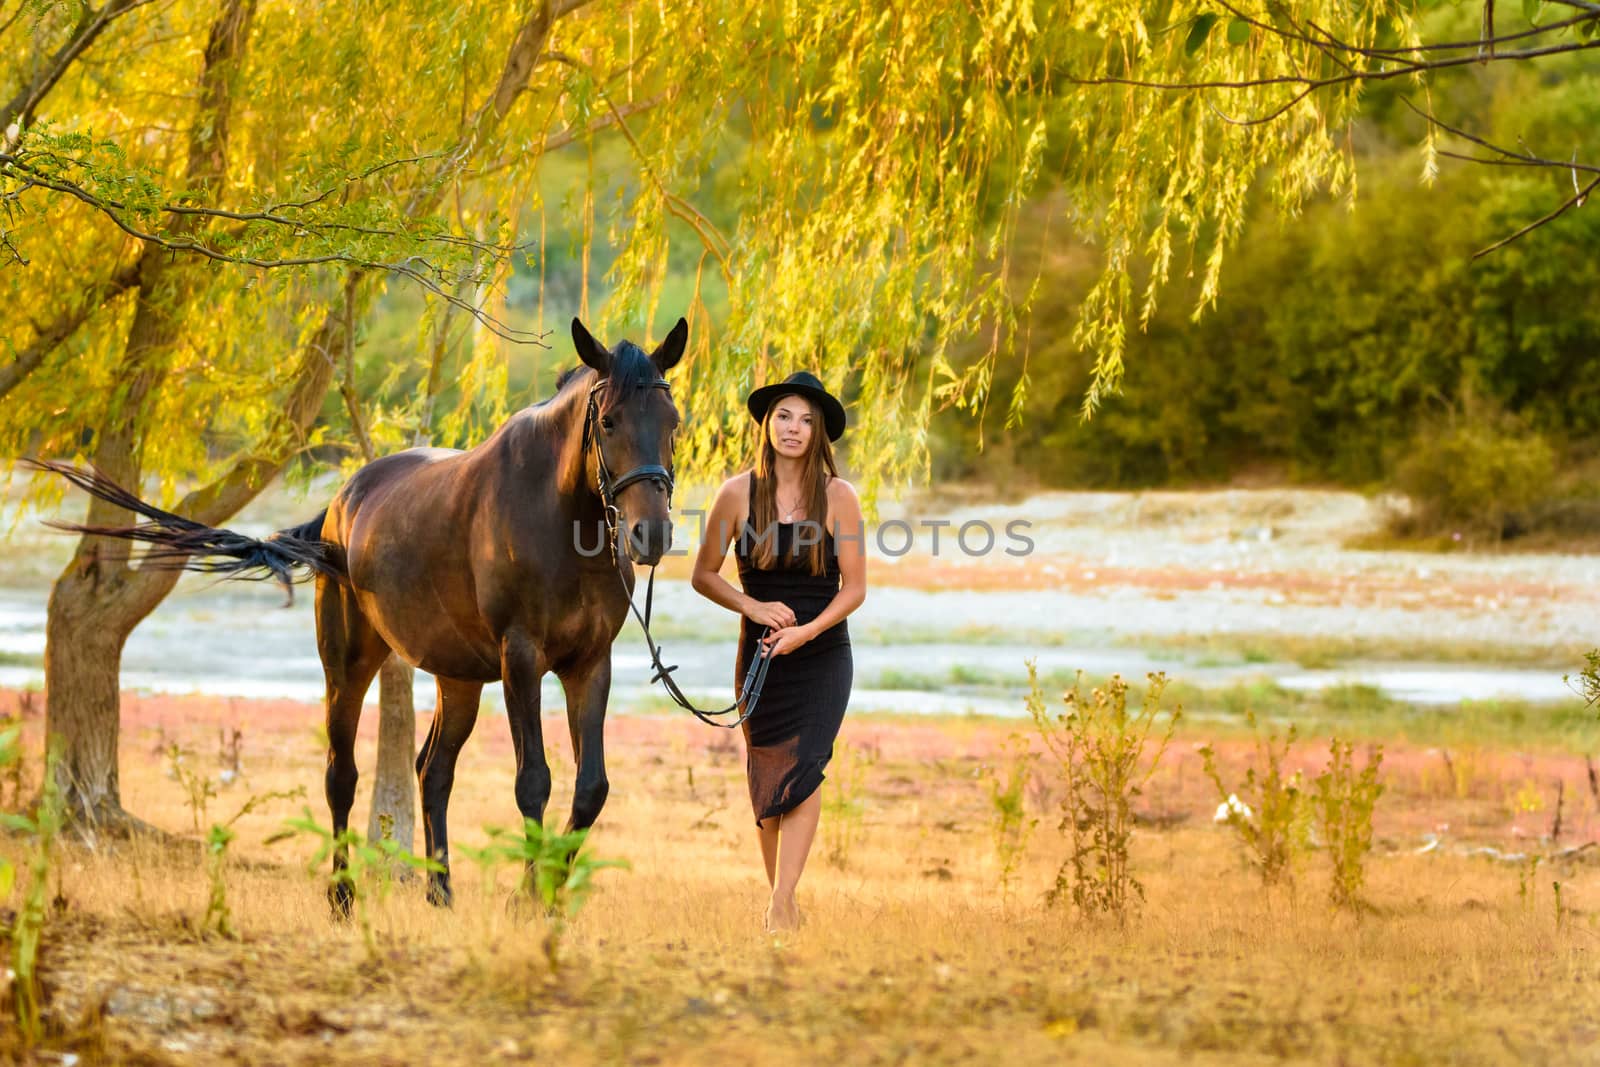 A girl in a beautiful black dress and a black hat walks with a horse across the field by Madhourse